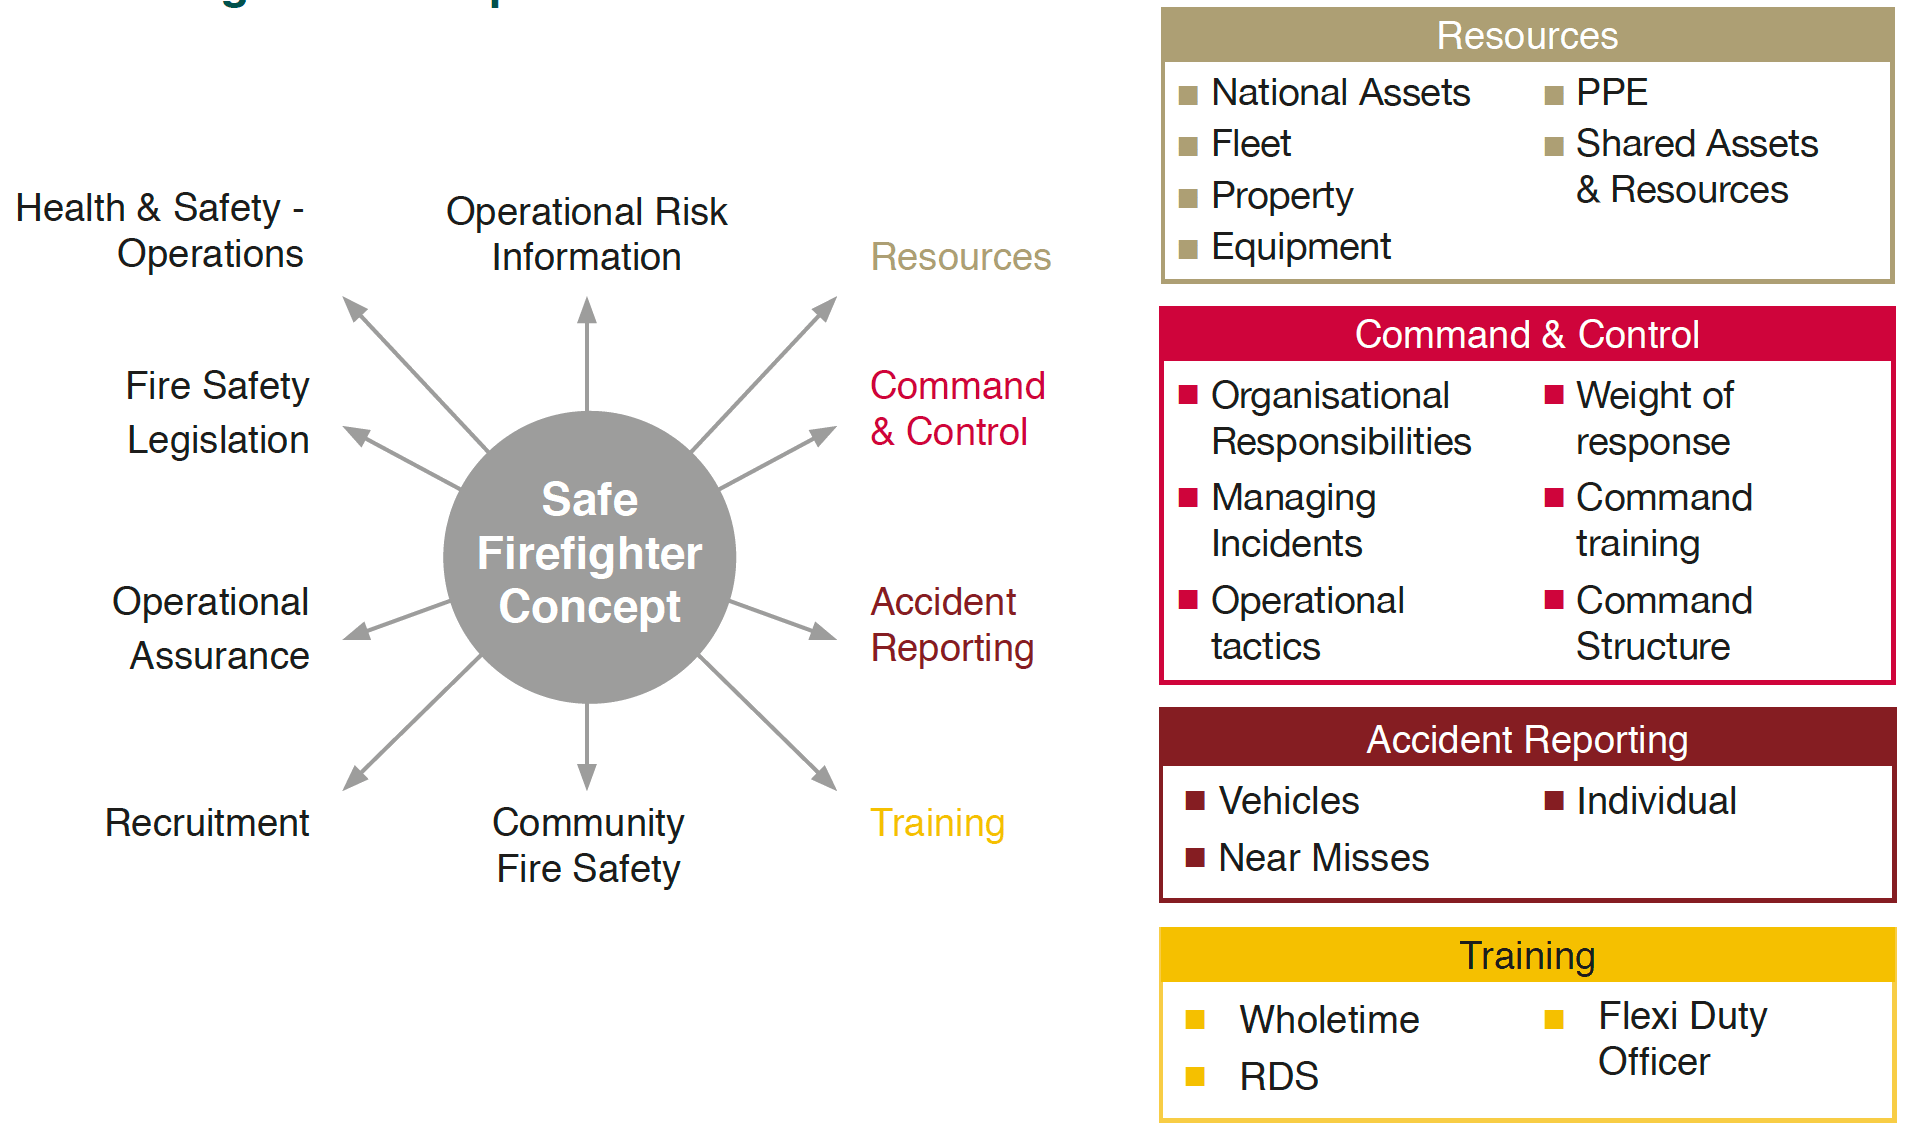 The diagram depicts the aspects which contribute to the make-up of a safe firefighter, inclusive of, the provision of operational risk information, resources, command and control, accident reporting, training, community fire safety, recruitment, operational assurance, fire safety legislation and operational health and safety.
In more detail resources will include – national assets, fleet, property, equipment, PPE and shared assets and resources. Command and control will include – organisational responsibilities, managing incidents, operational tactics, weight of response, command training and command structure. Accident reporting will include – vehicles, individuals and near misses. Training will include – wholetime, flexi duty officer and RDS.